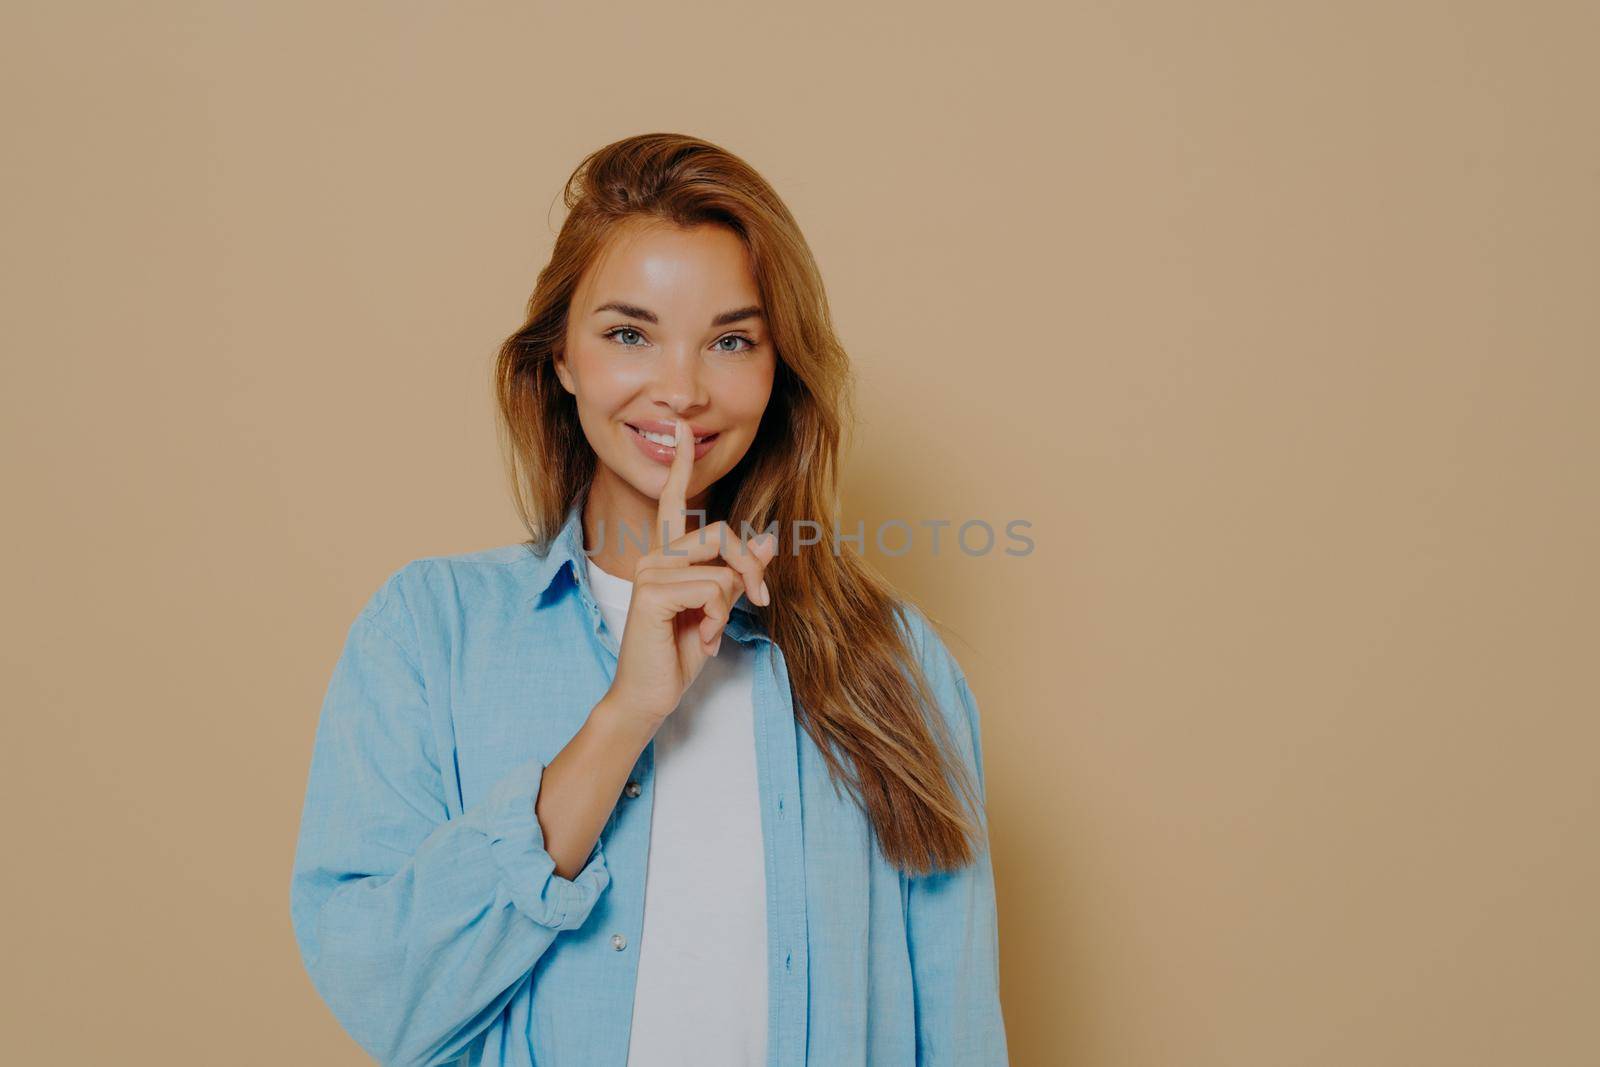 Excited woman showing silence gesture on beige background by vkstock